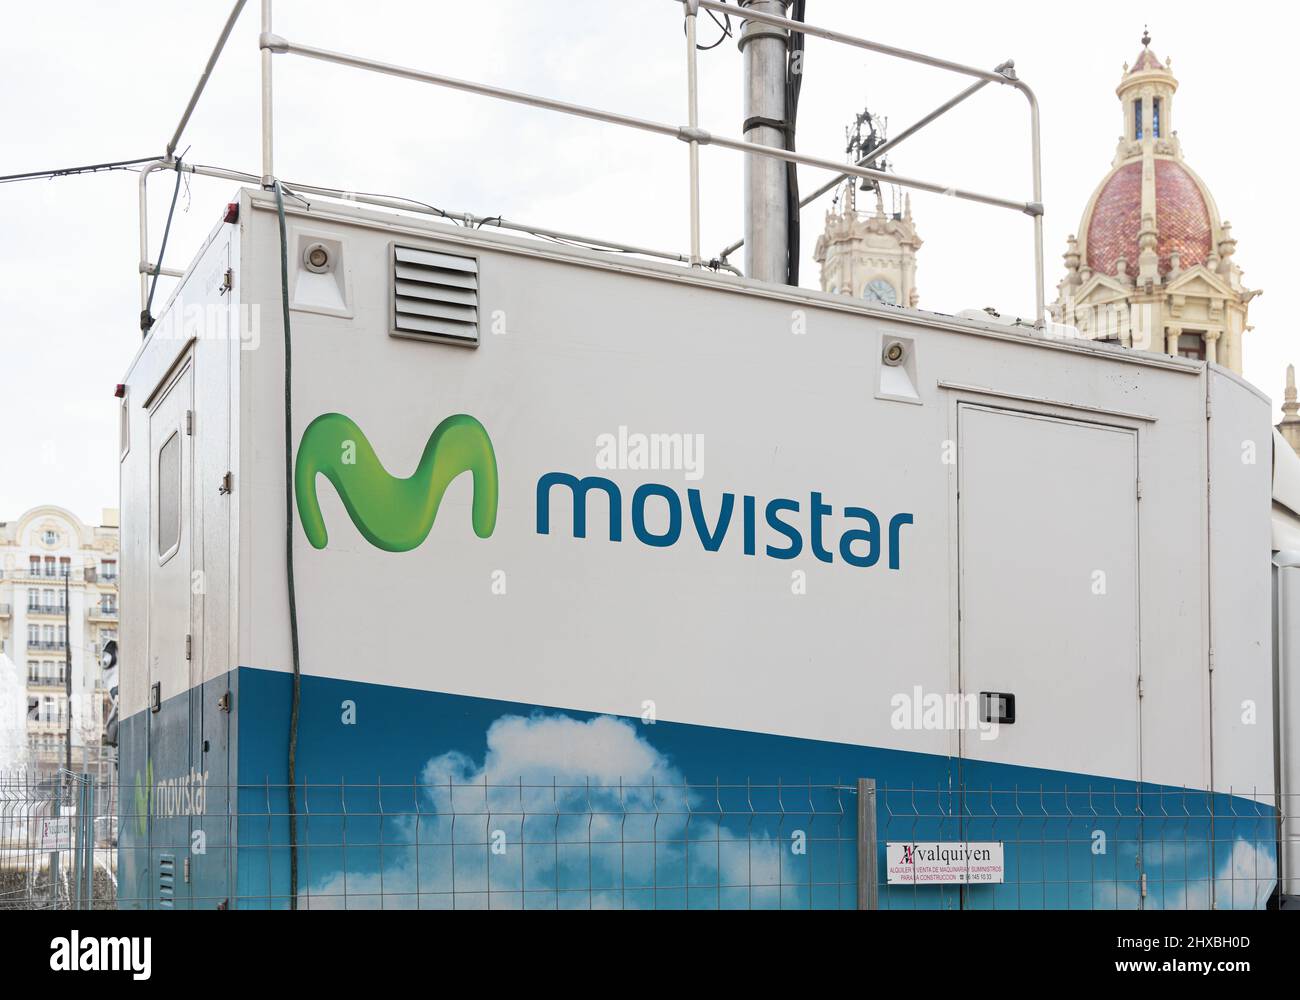 VALENCIA, SPAIN - MARCH 10, 2022: Movistar is a major telecommunications provider owned by Telefónica. Fallas Stock Photo